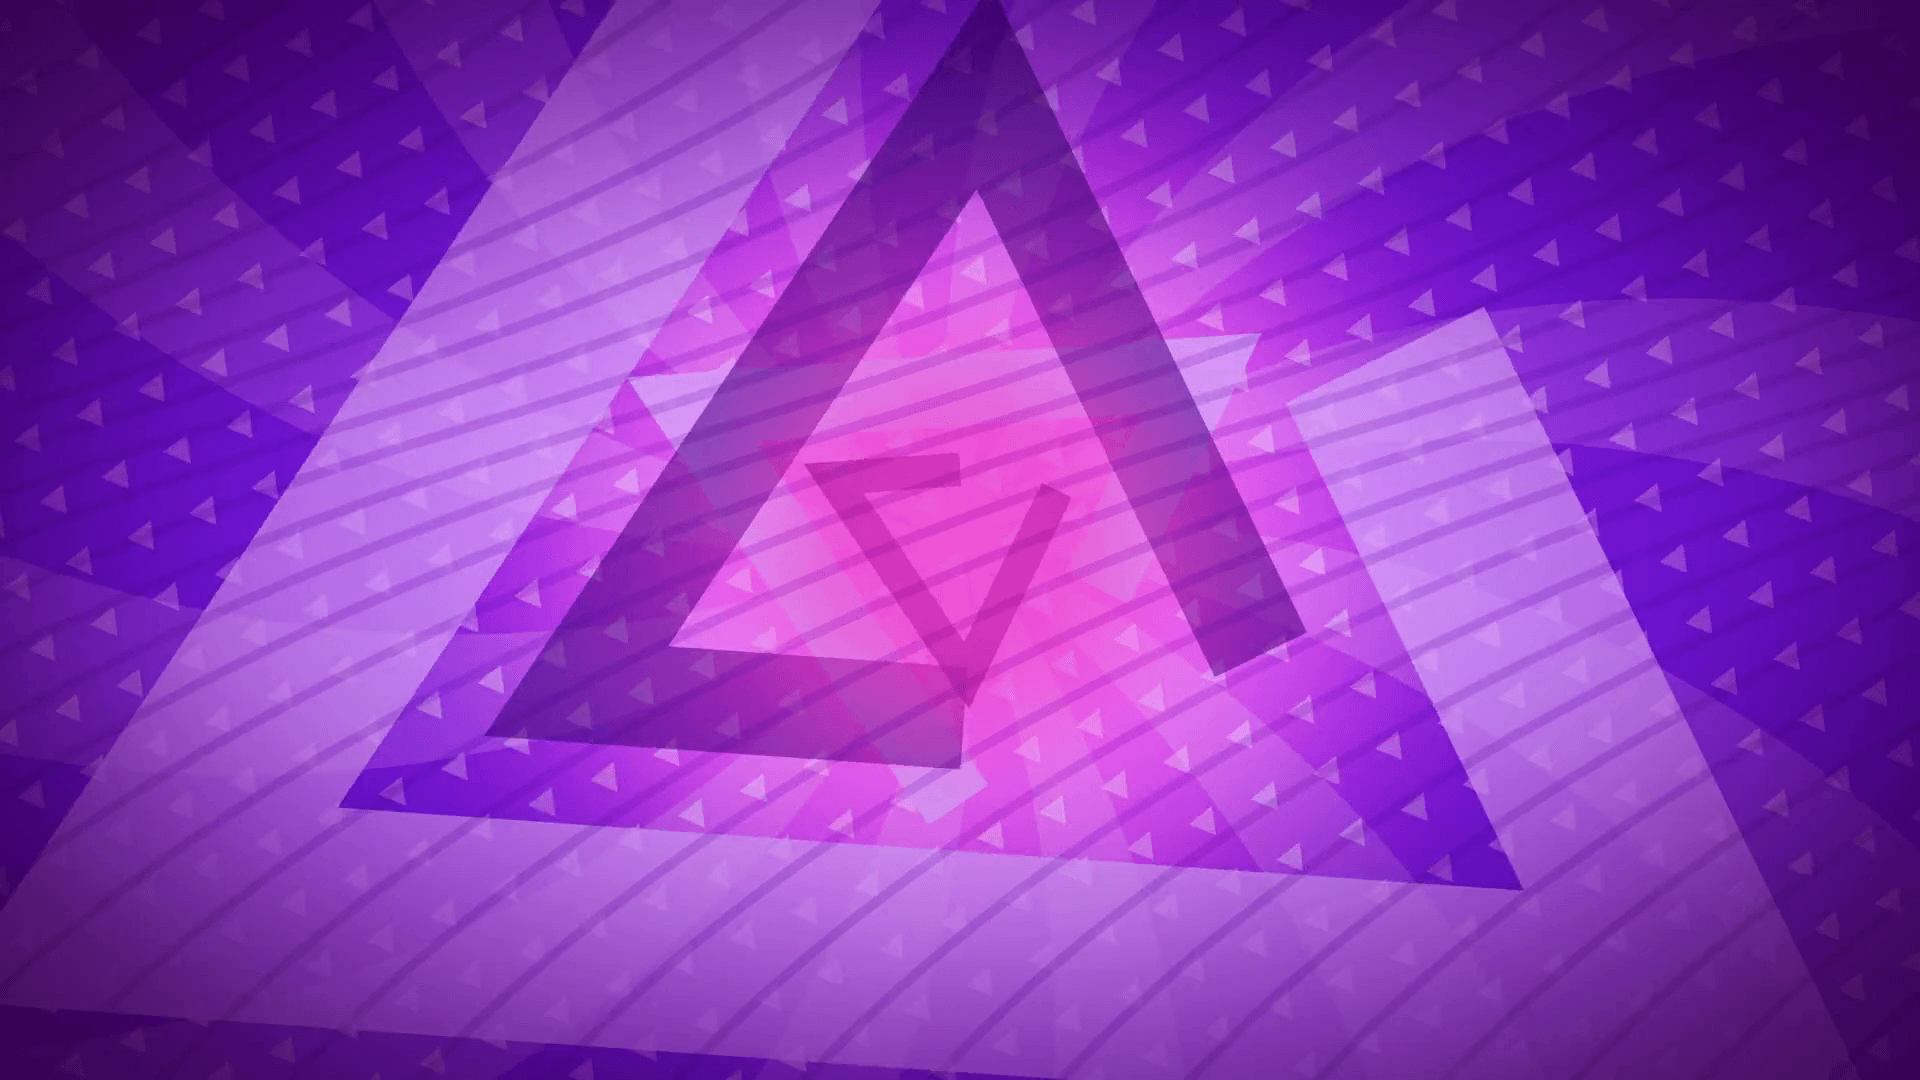 Blue triangles Abstract Background Animation loop for your logo or